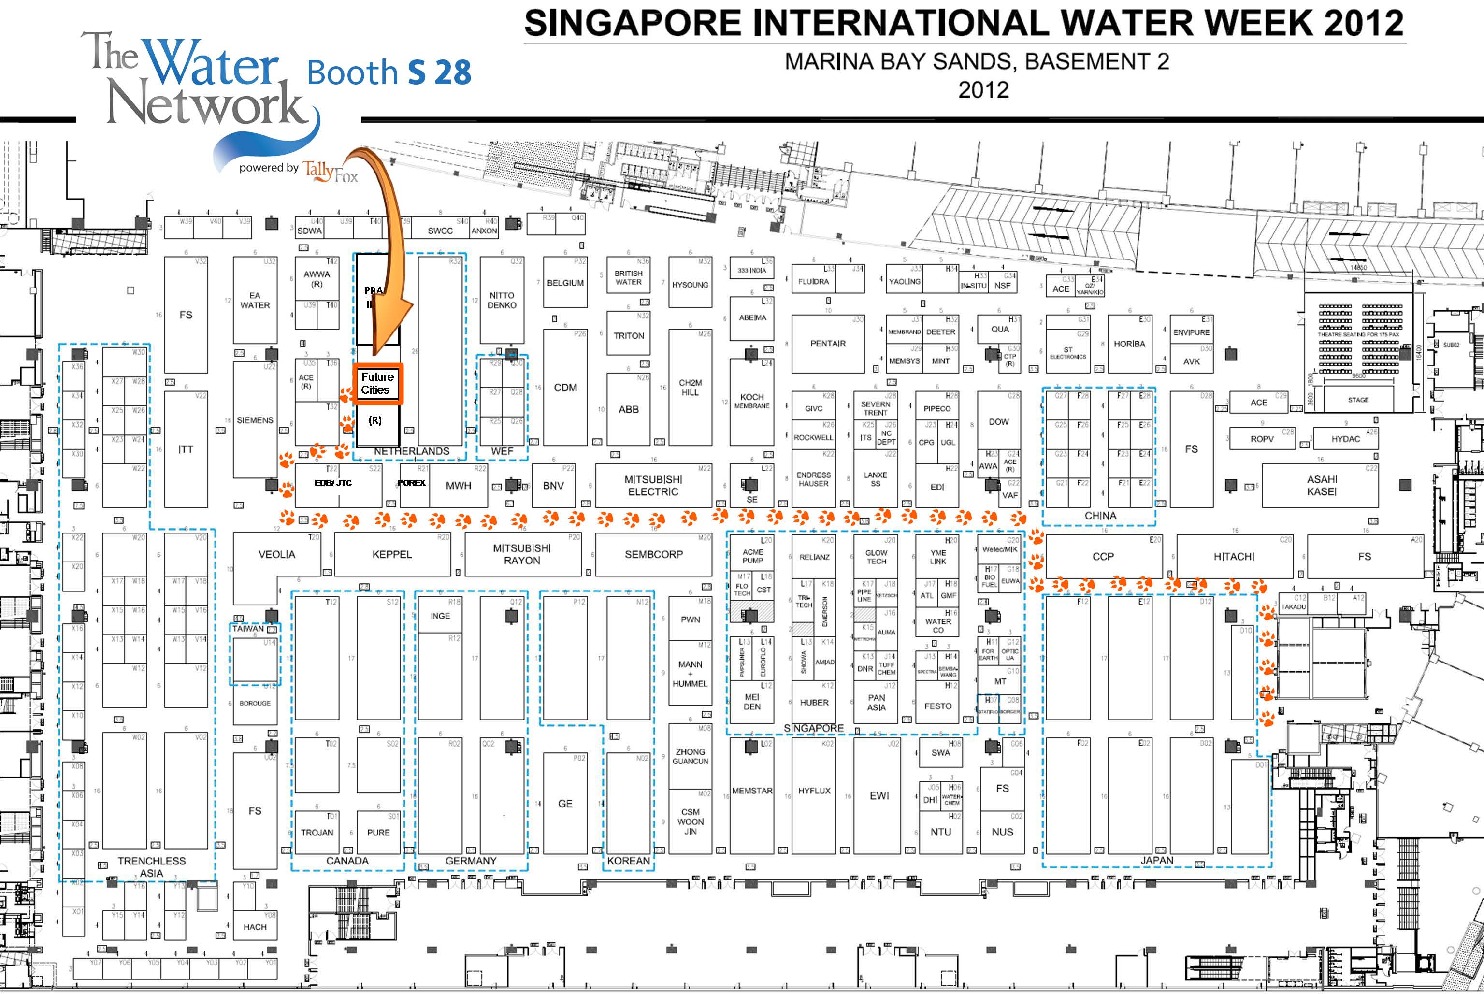 The Water Network development team is in Singapore at Singapore Water Week. Please stop by our booth at S8 if you are at SIWW. Our experts excha...